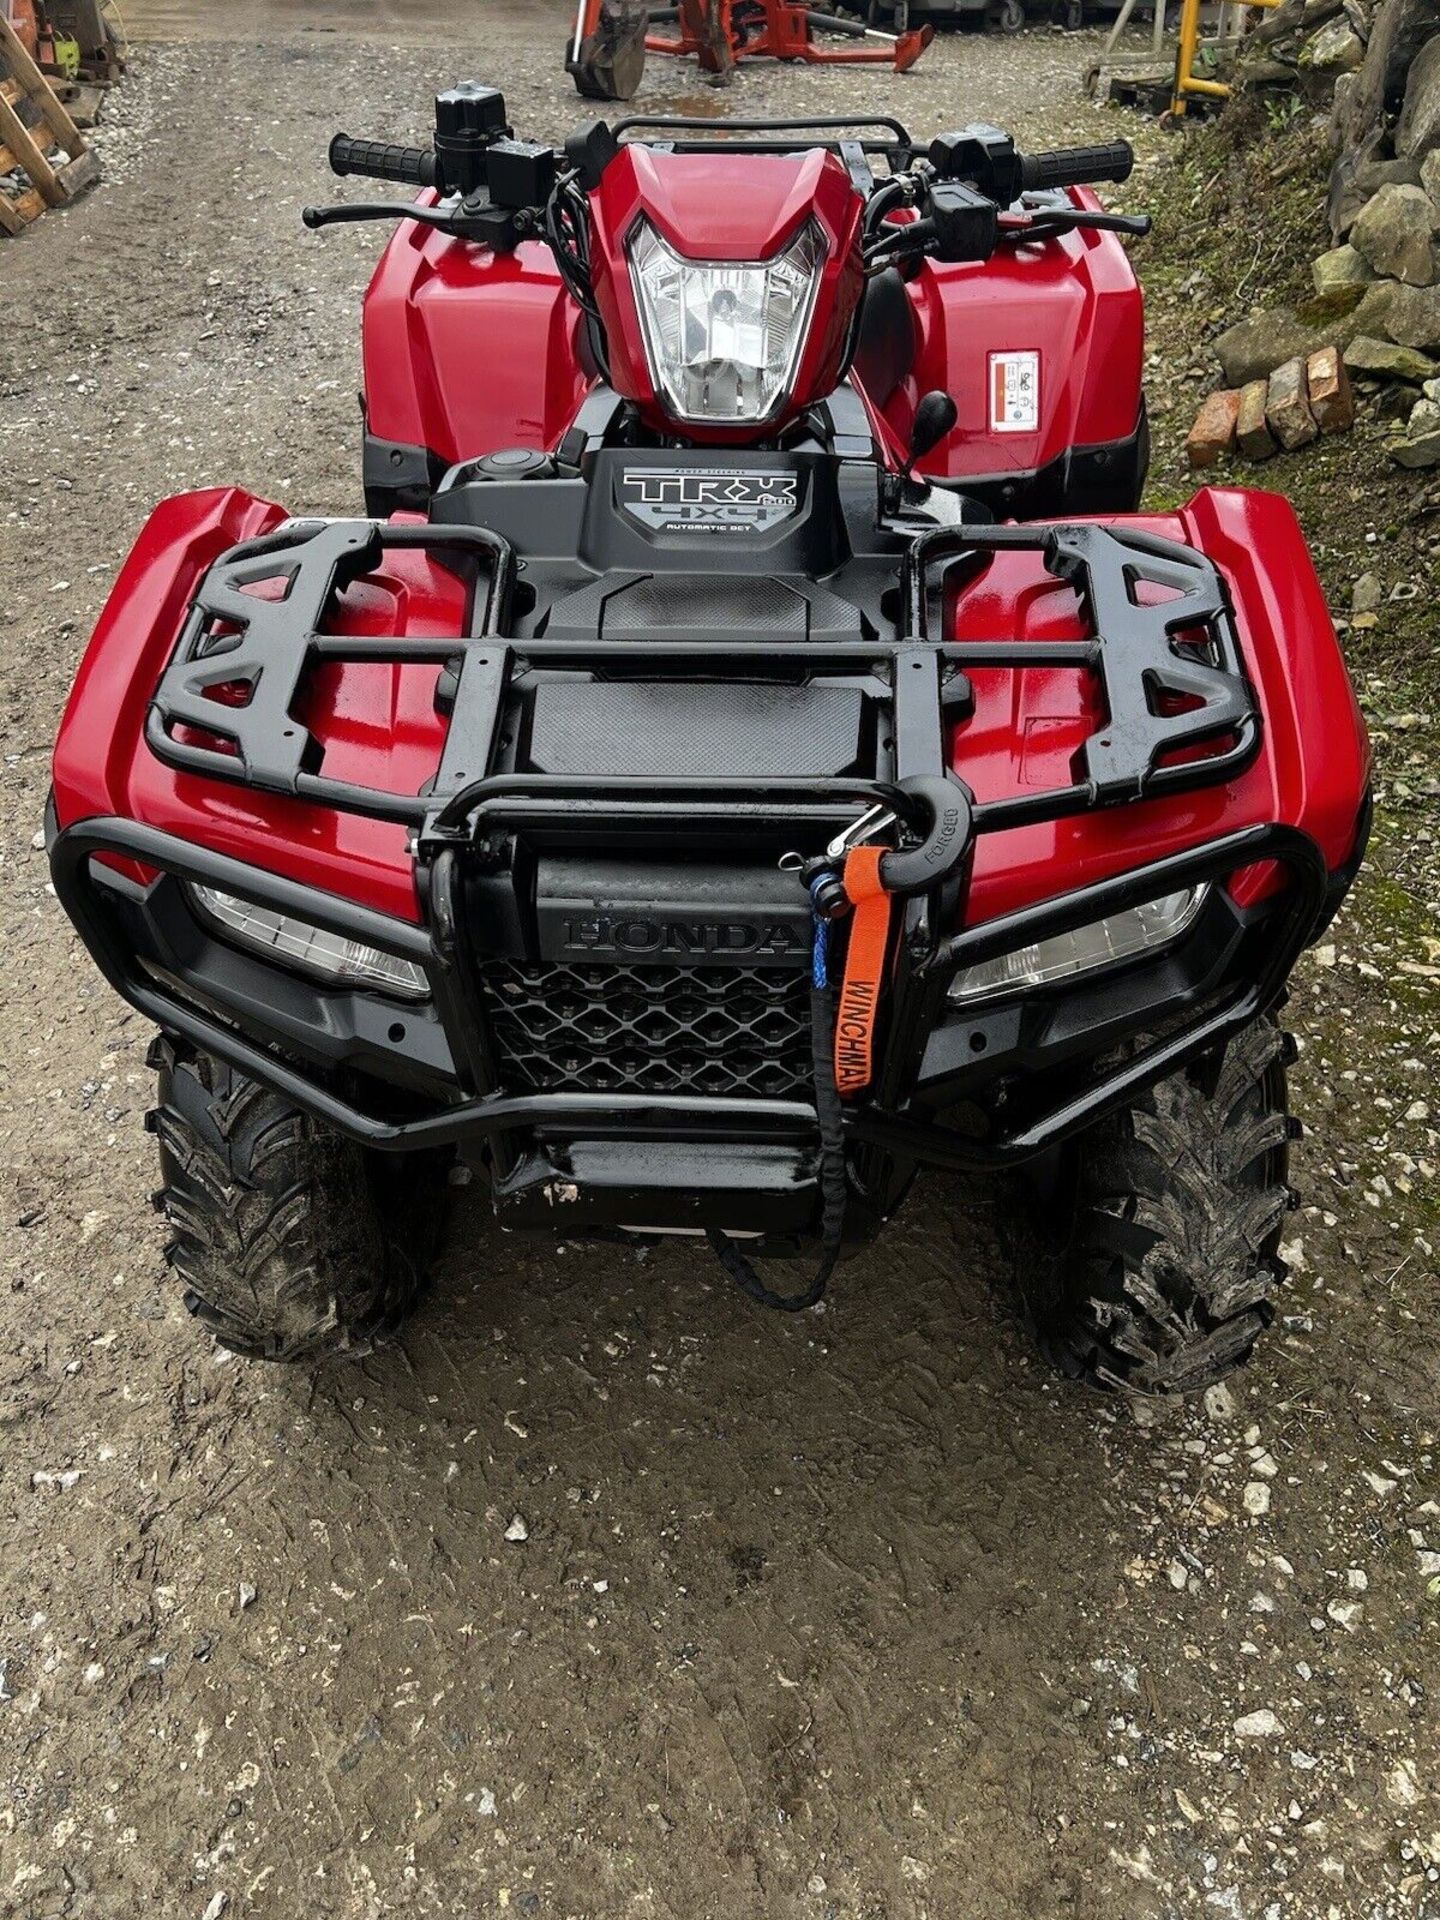 EPS PIONEER: HONDA TRX 500 FE QUAD WITH ELECTRIC POWER STEERING - Image 4 of 8